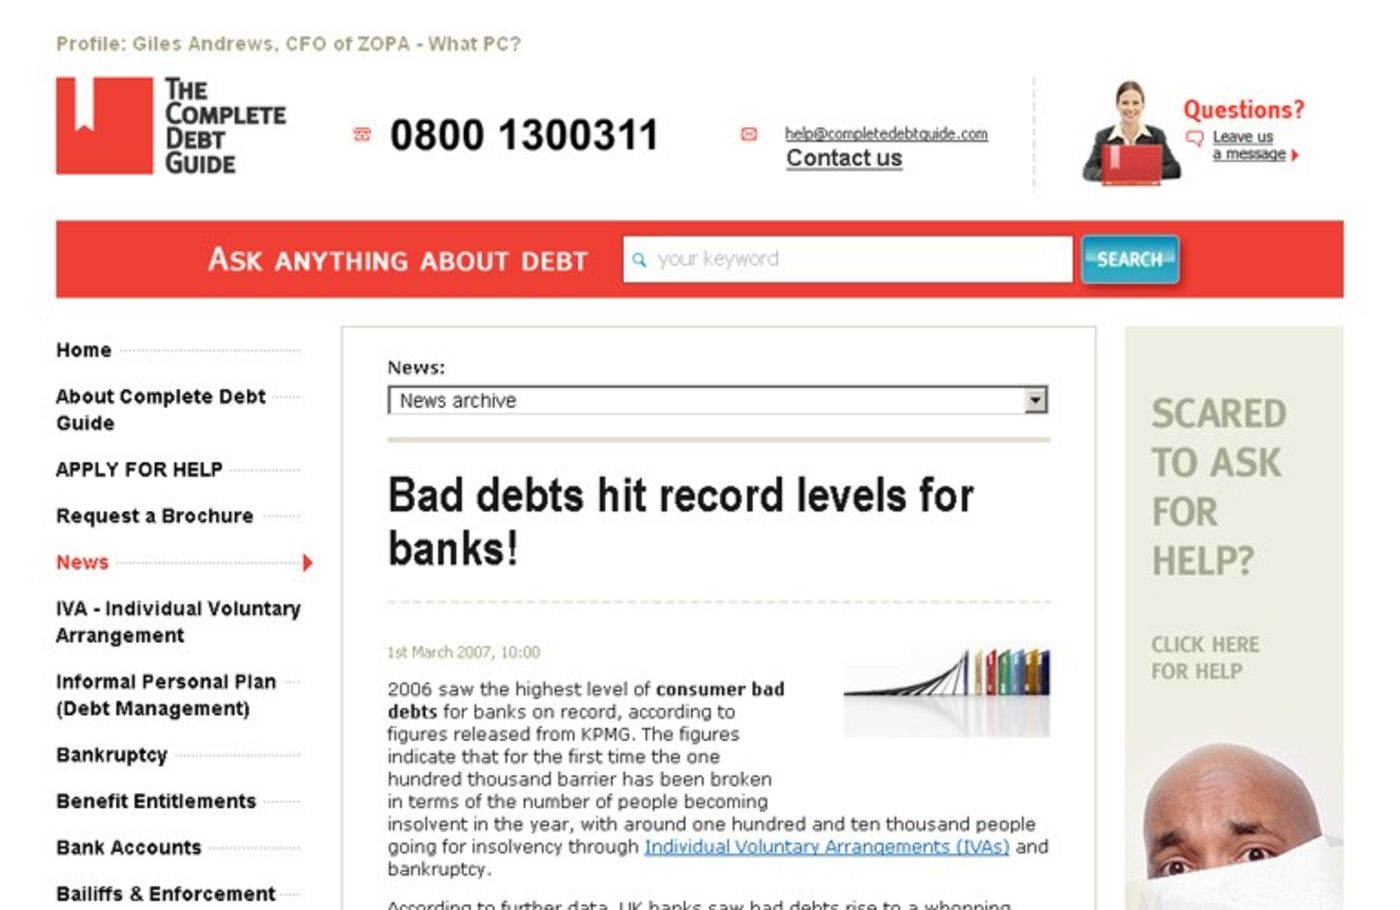 The Complete Debt Guide News Archive